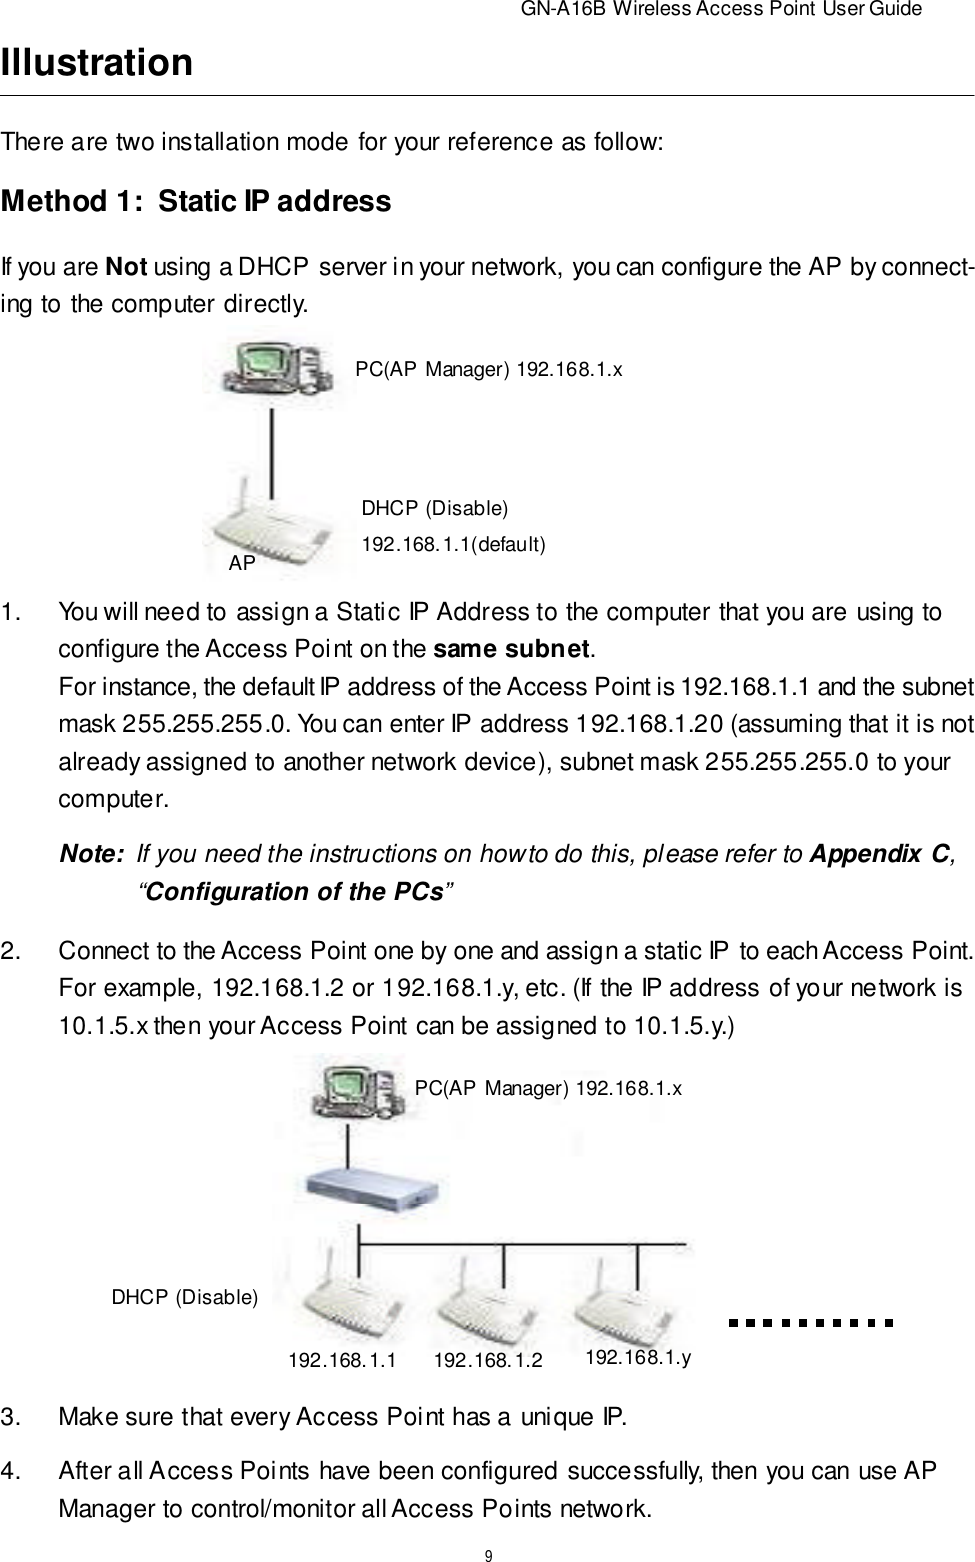                          GN-A16B Wireless Access Point User Guide9IllustrationThere are two installation mode for your reference as follow:Method 1:   Static IP addressIf you are Not using a DHCP server in your network, you can configure the AP by connect-ing to the computer directly.PC(AP Manager) 192.168.1.xDHCP (Disable)192.168.1.1(default)AP1.You will need to assign a Static IP Address to the computer that you are using toconfigure the Access Point on the same subnet.For instance, the default IP address of the Access Point is 192.168.1.1 and the subnetmask 255.255.255.0. You can enter IP address 192.168.1.20 (assuming that it is notalready assigned to another network device), subnet mask 255.255.255.0 to yourcomputer.Note:  If you need the instructions on how to do this, please refer to Appendix C,   “Configuration of the PCs”2.Connect to the Access Point one by one and assign a static IP to each Access Point.For example, 192.168.1.2 or 192.168.1.y, etc. (If the IP address of your network is10.1.5.x then your Access Point can be assigned to 10.1.5.y.)3.Make sure that every Access Point has a unique IP.4.After all Access Points have been configured successfully, then you can use APManager to control/monitor all Access Points network.PC(AP Manager) 192.168.1.xDHCP (Disable)192.168.1.1 192.168.1.2192.168.1.y